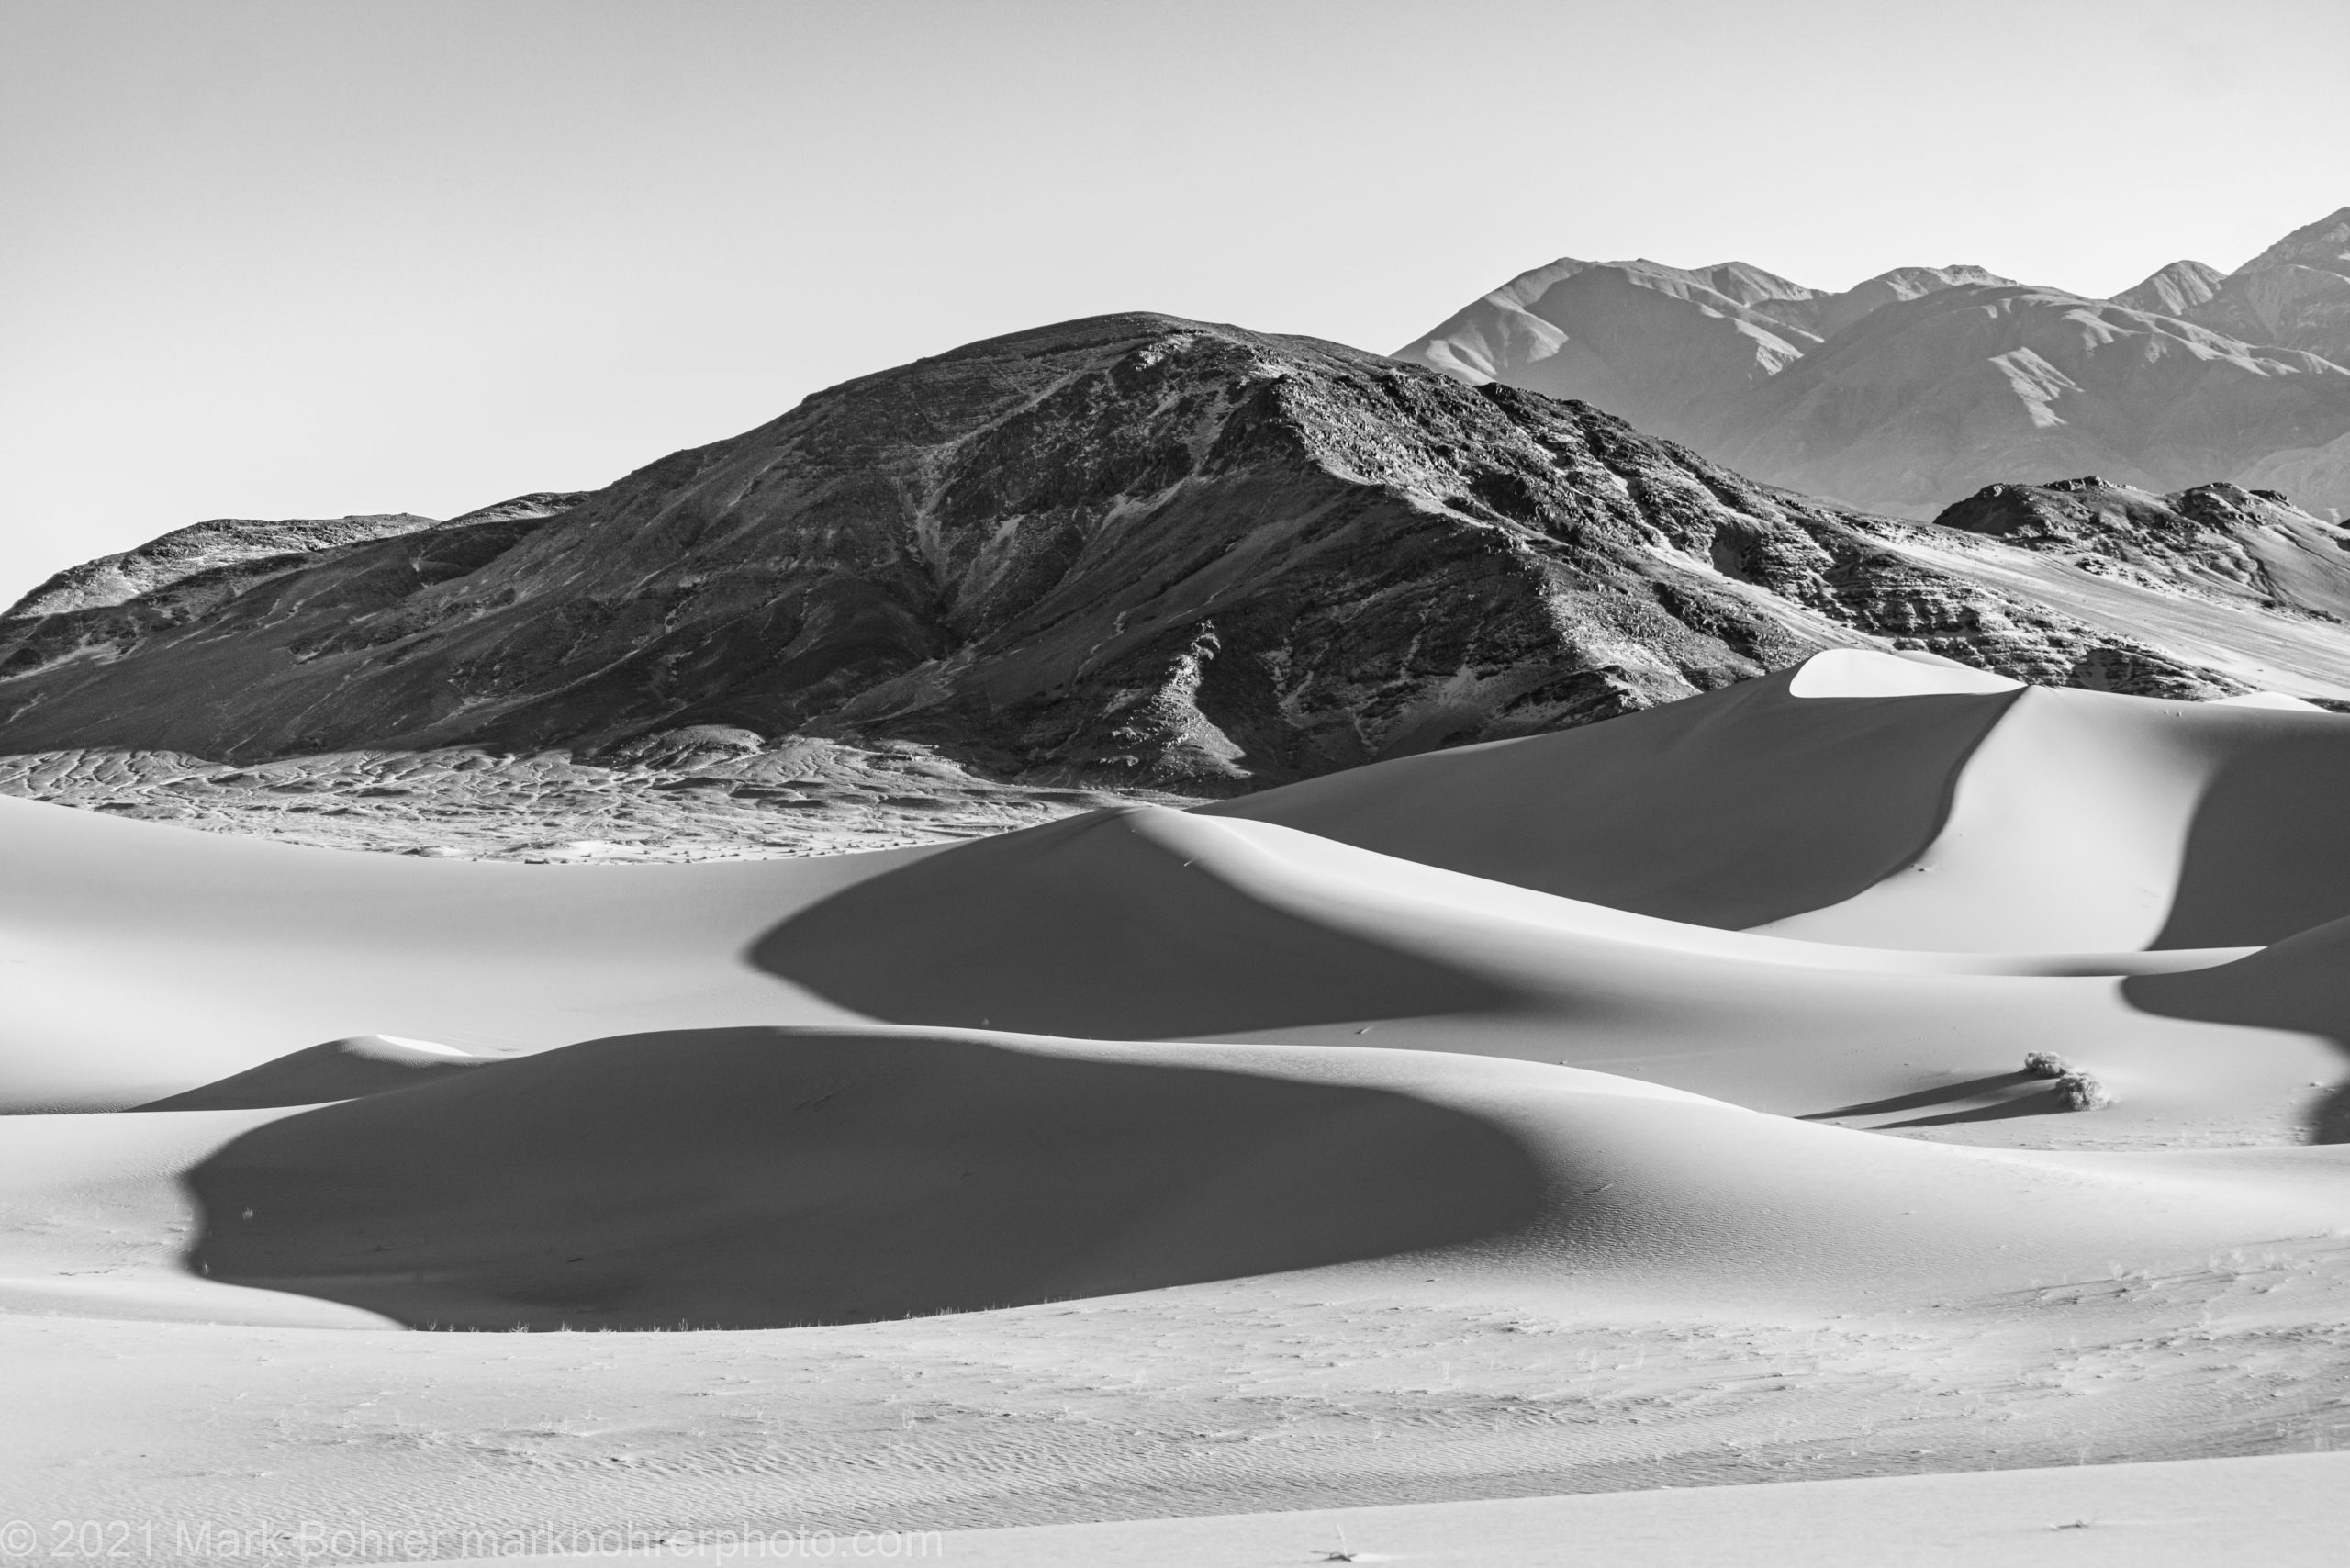 ‘Road‘ shadow and textures in black and white - Ibex Dunes, Death Valley